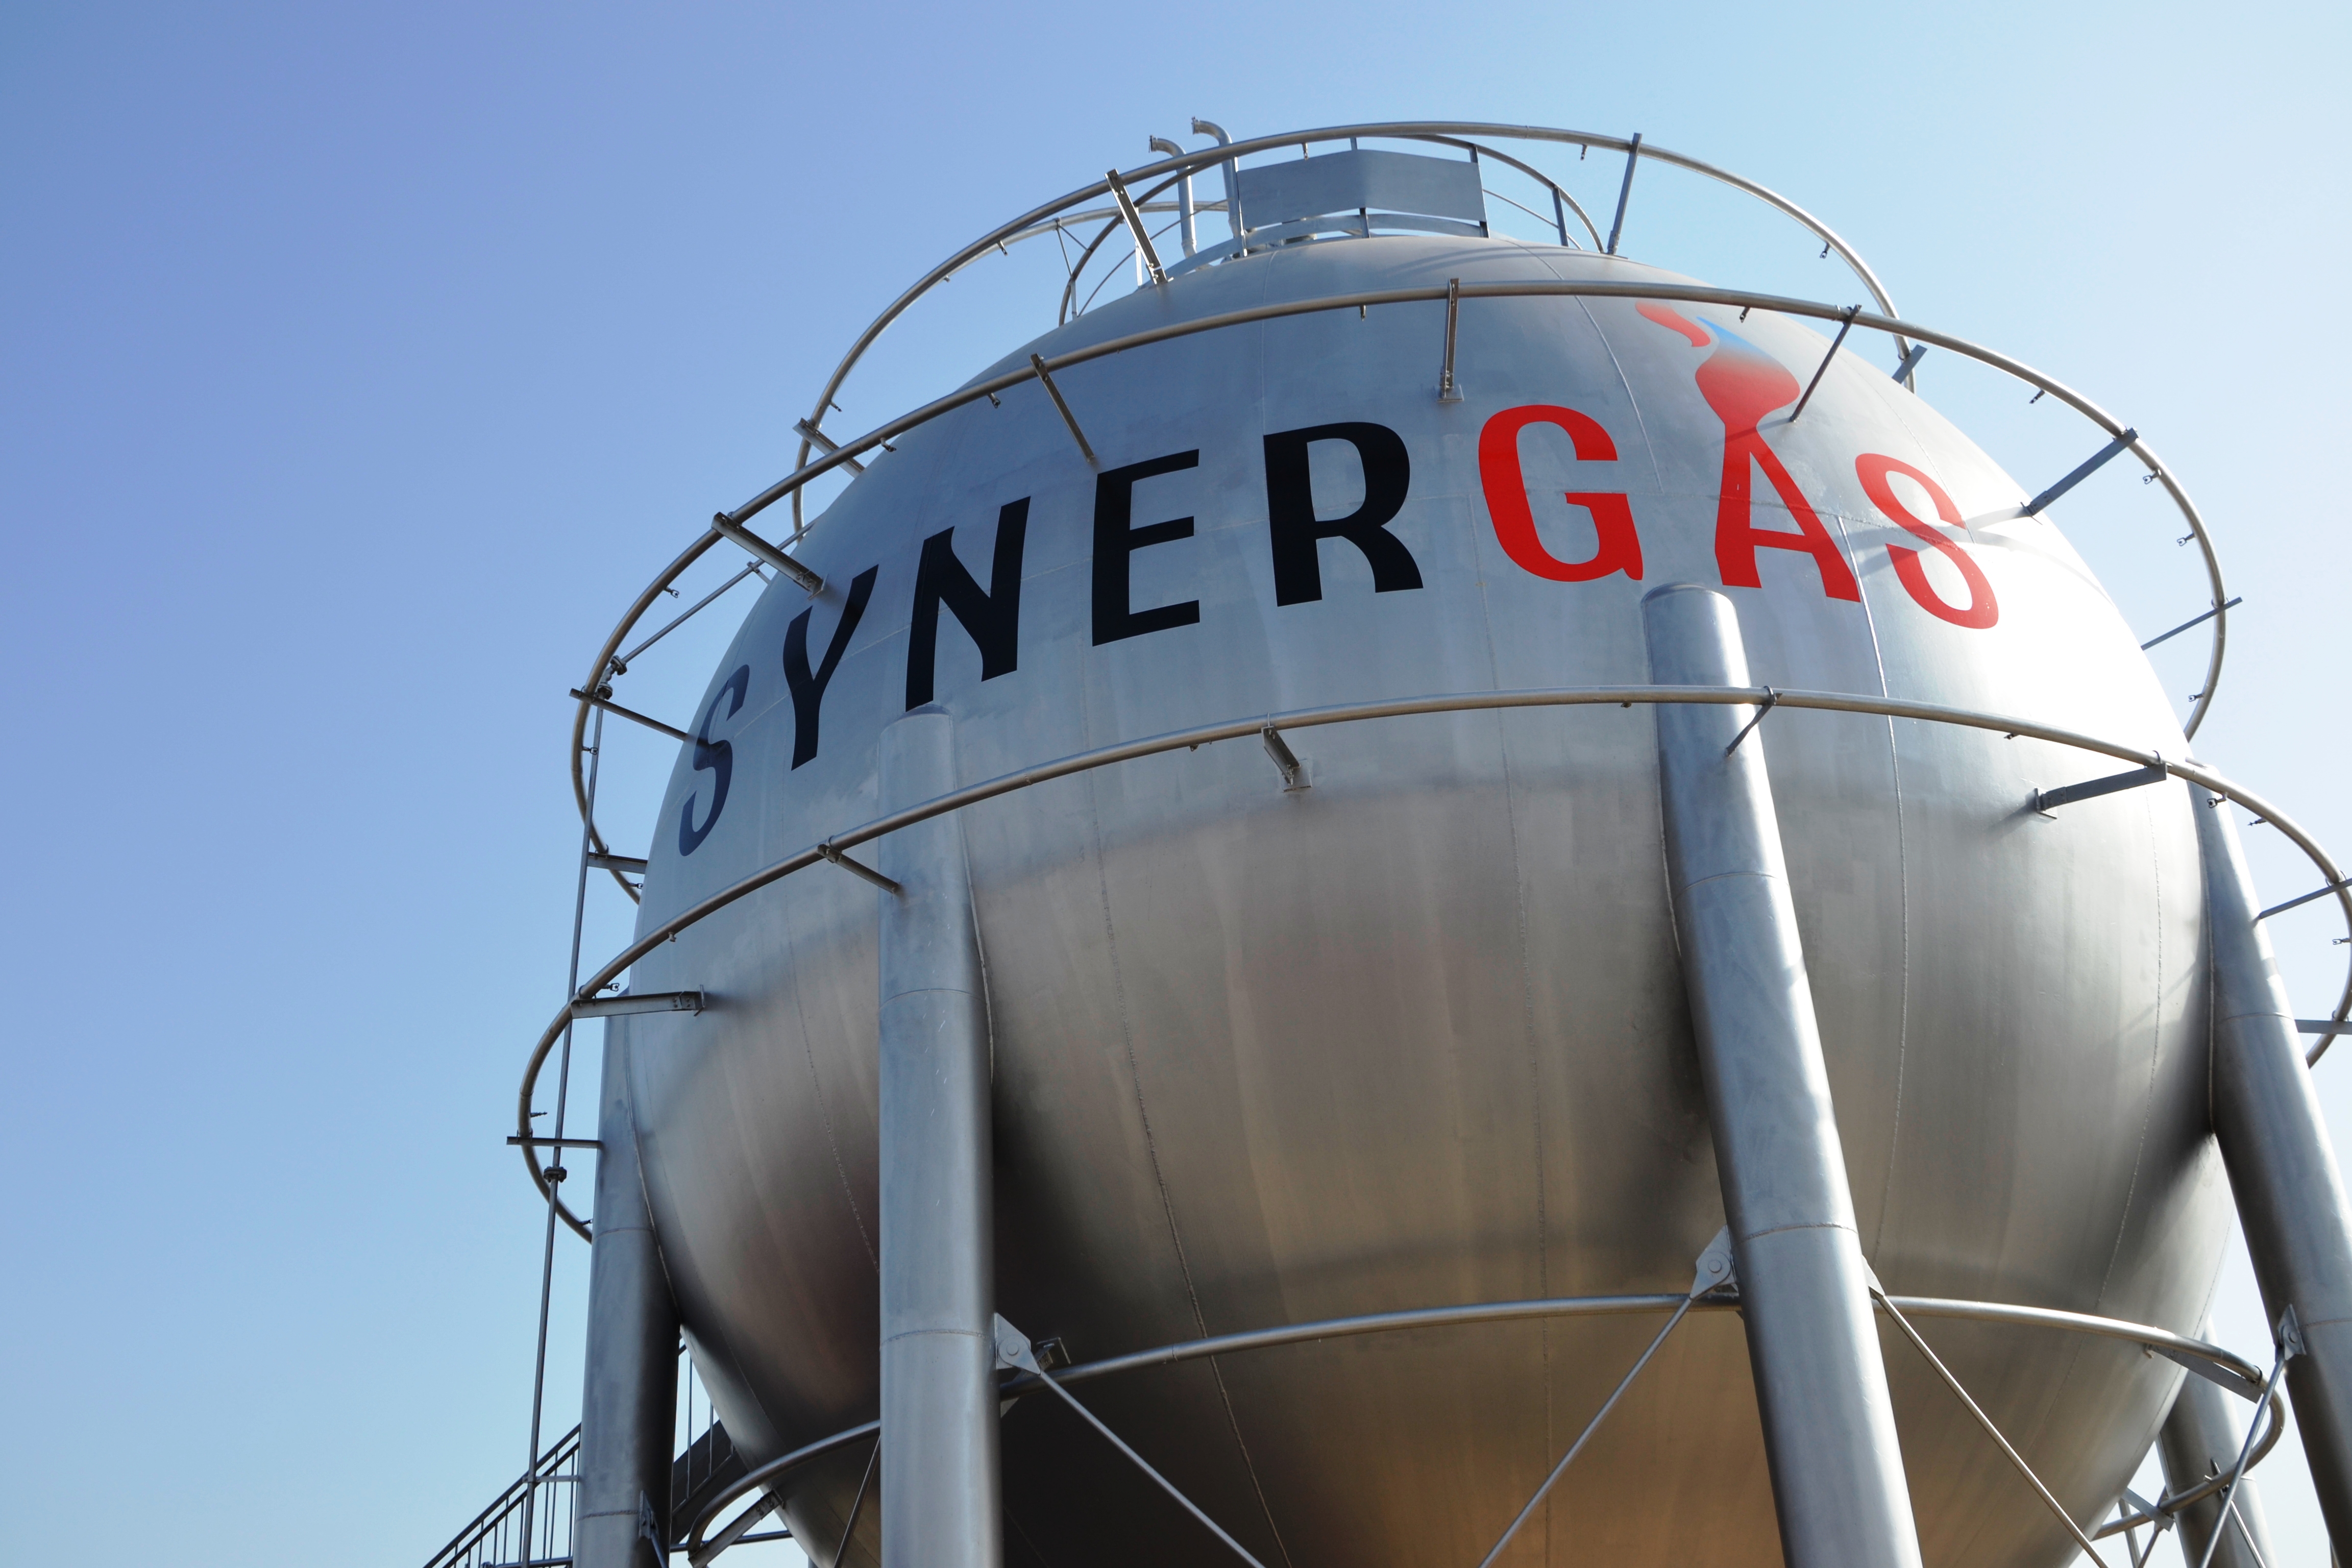 Synergas Presented